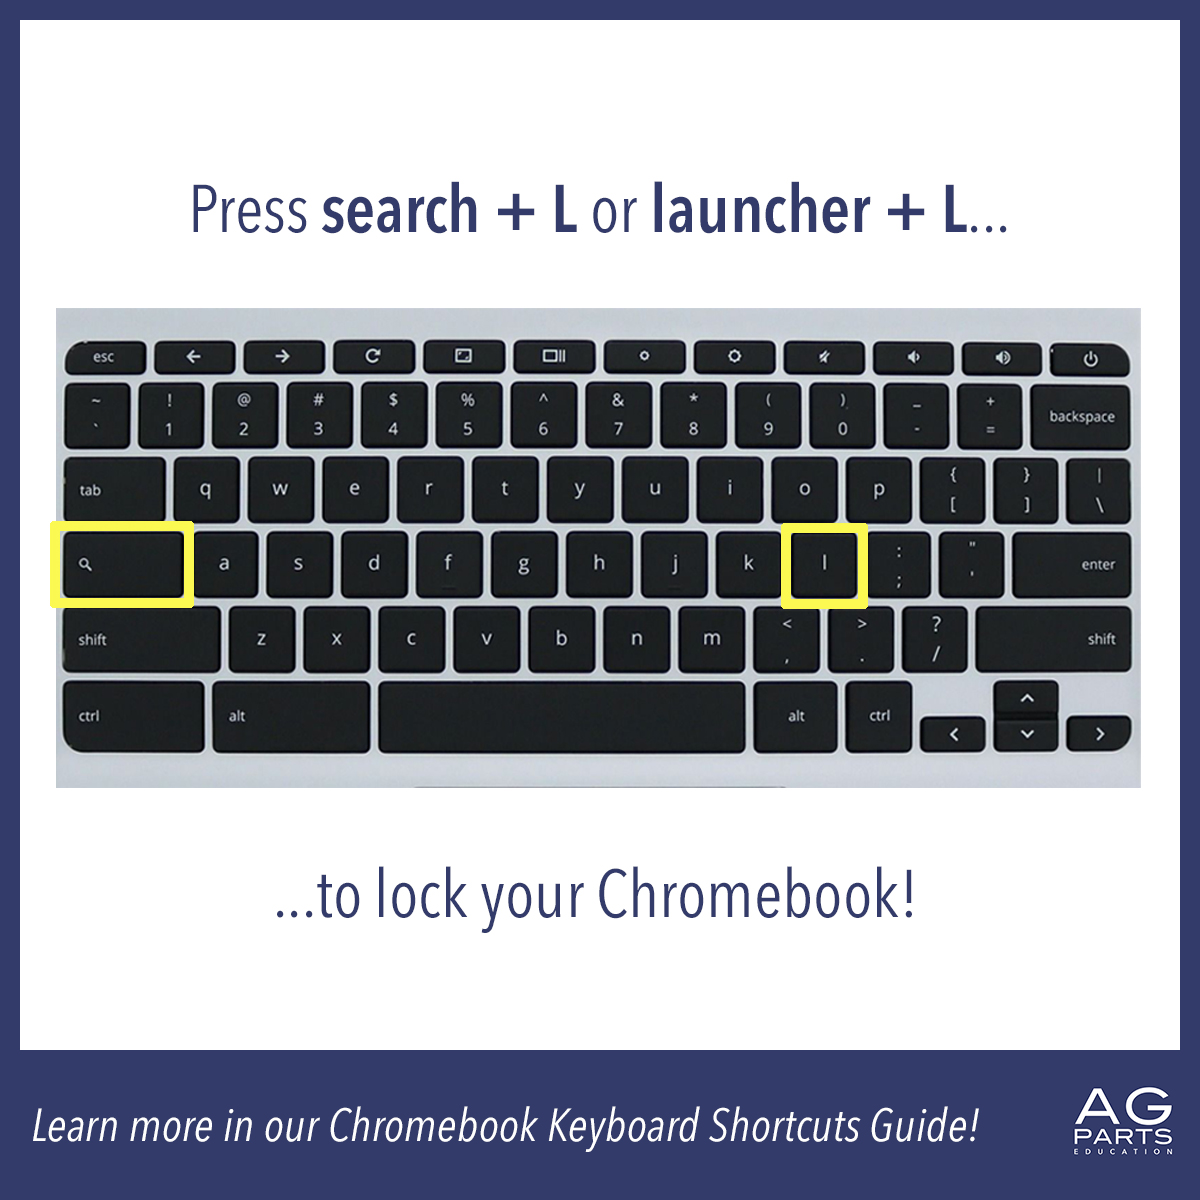 Locking your Chromebook is quick and easy with this simple keyboard shortcut: search + L or launcher + L.

Learn more in our Chromebook Keyboard Shortcut Guide: hubs.ly/Q01K2R5m0

#AGPartsEducation #Chromebooks #KeyboardShortcut #EdTech